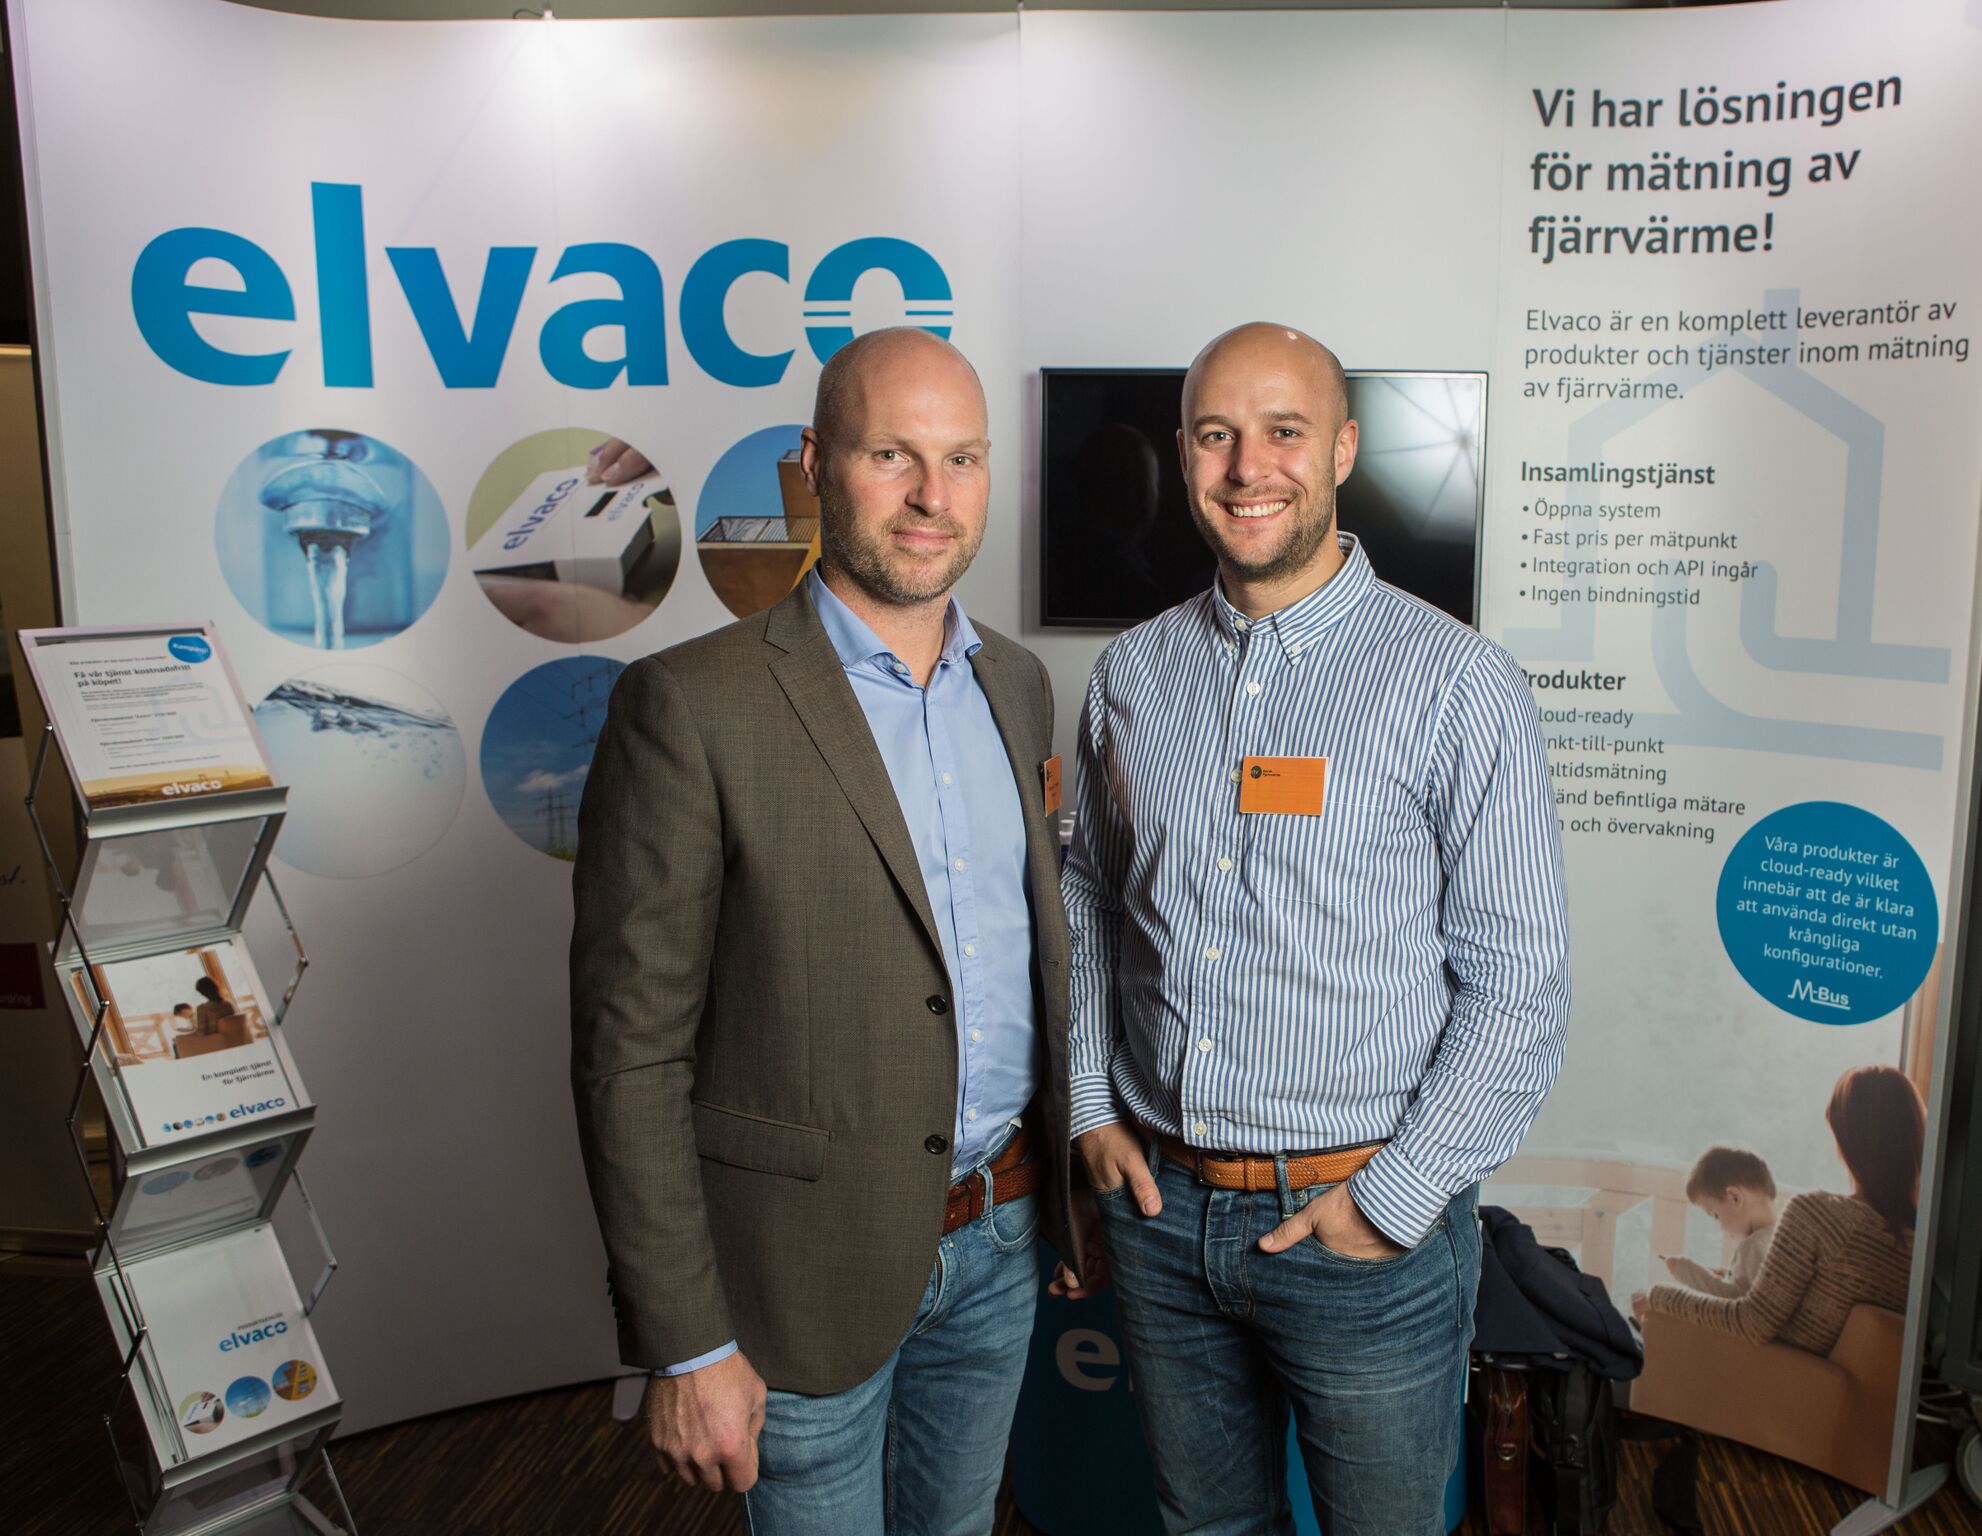 Meet us at the District heating days in Oslo